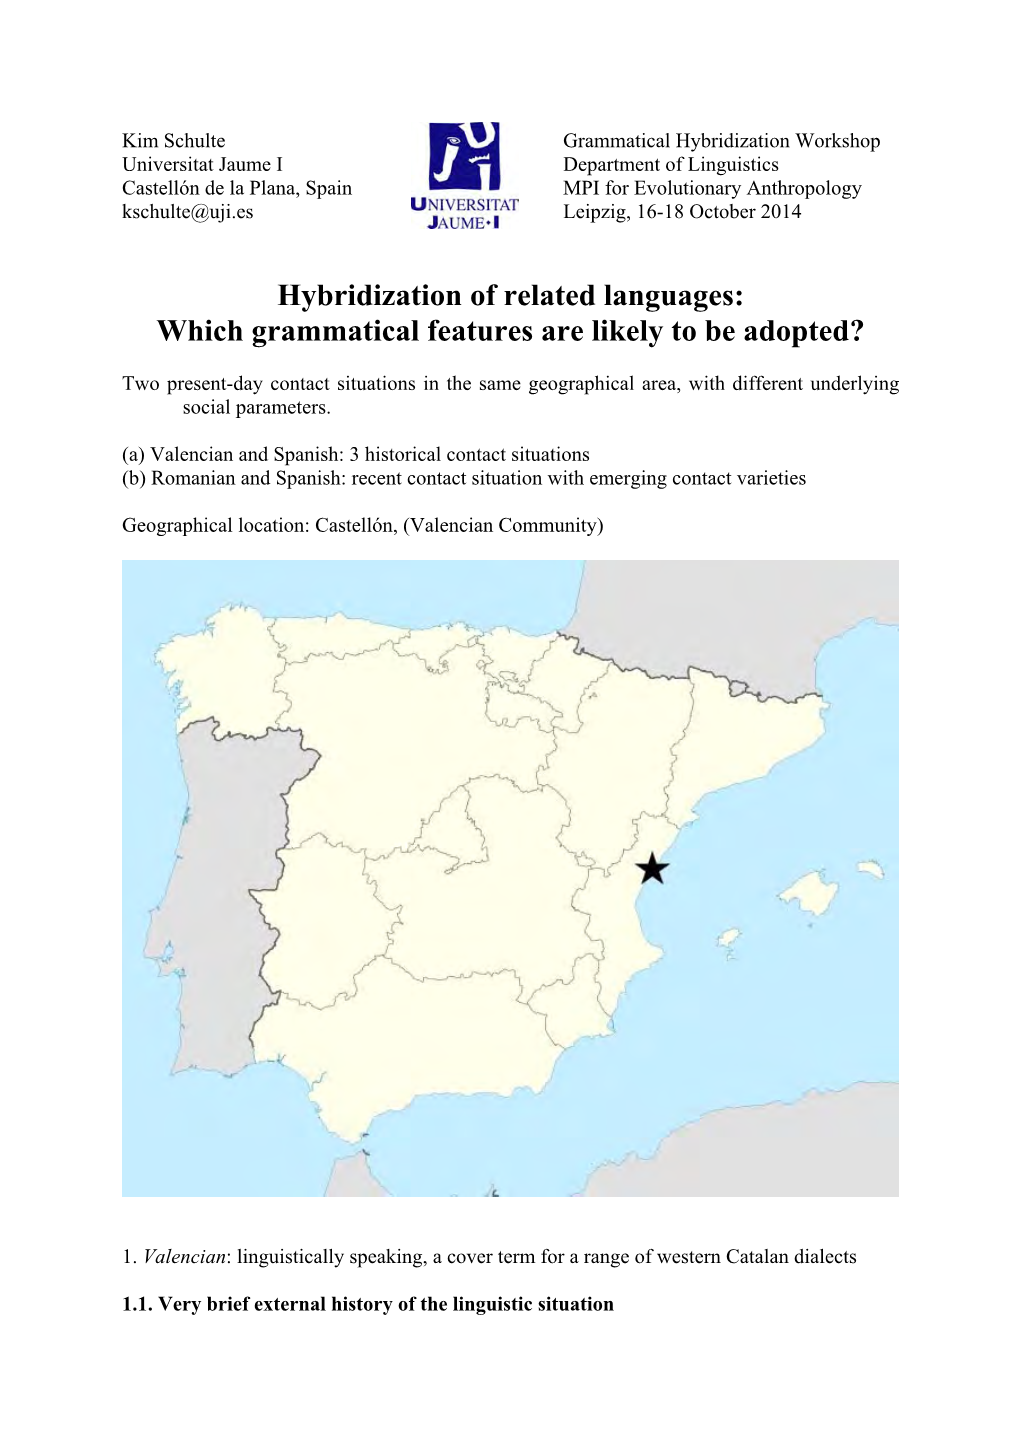 Hybridization of Related Languages: Which Grammatical Features Are Likely to Be Adopted?